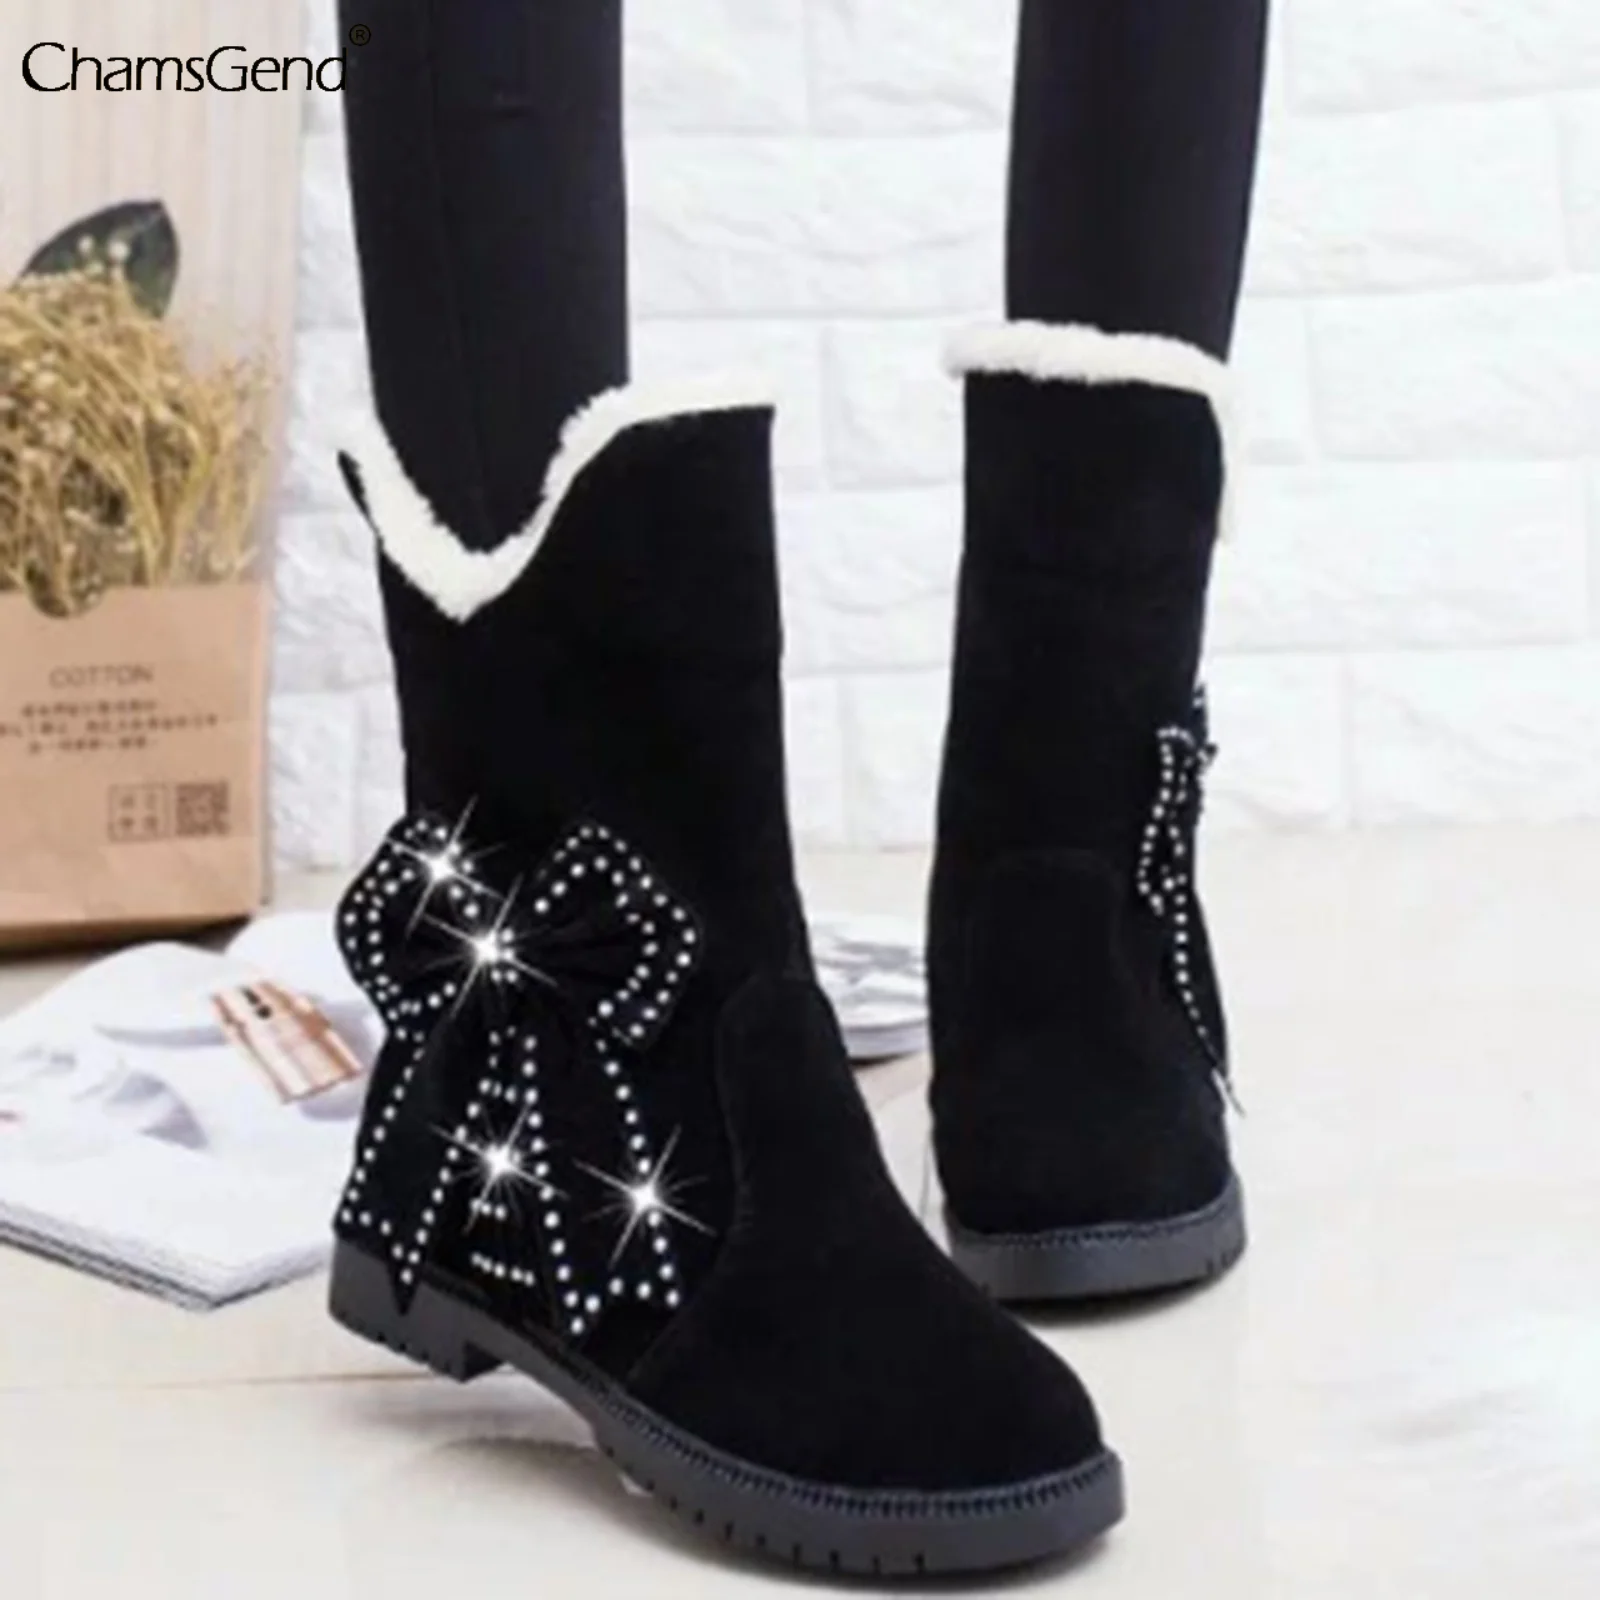 

Winter Women Boots Platform Shoes Keep Warm Mid-calf Snow Boots Ladies Comfortable Chaussures Femme Winter Shoes Botas Mujer